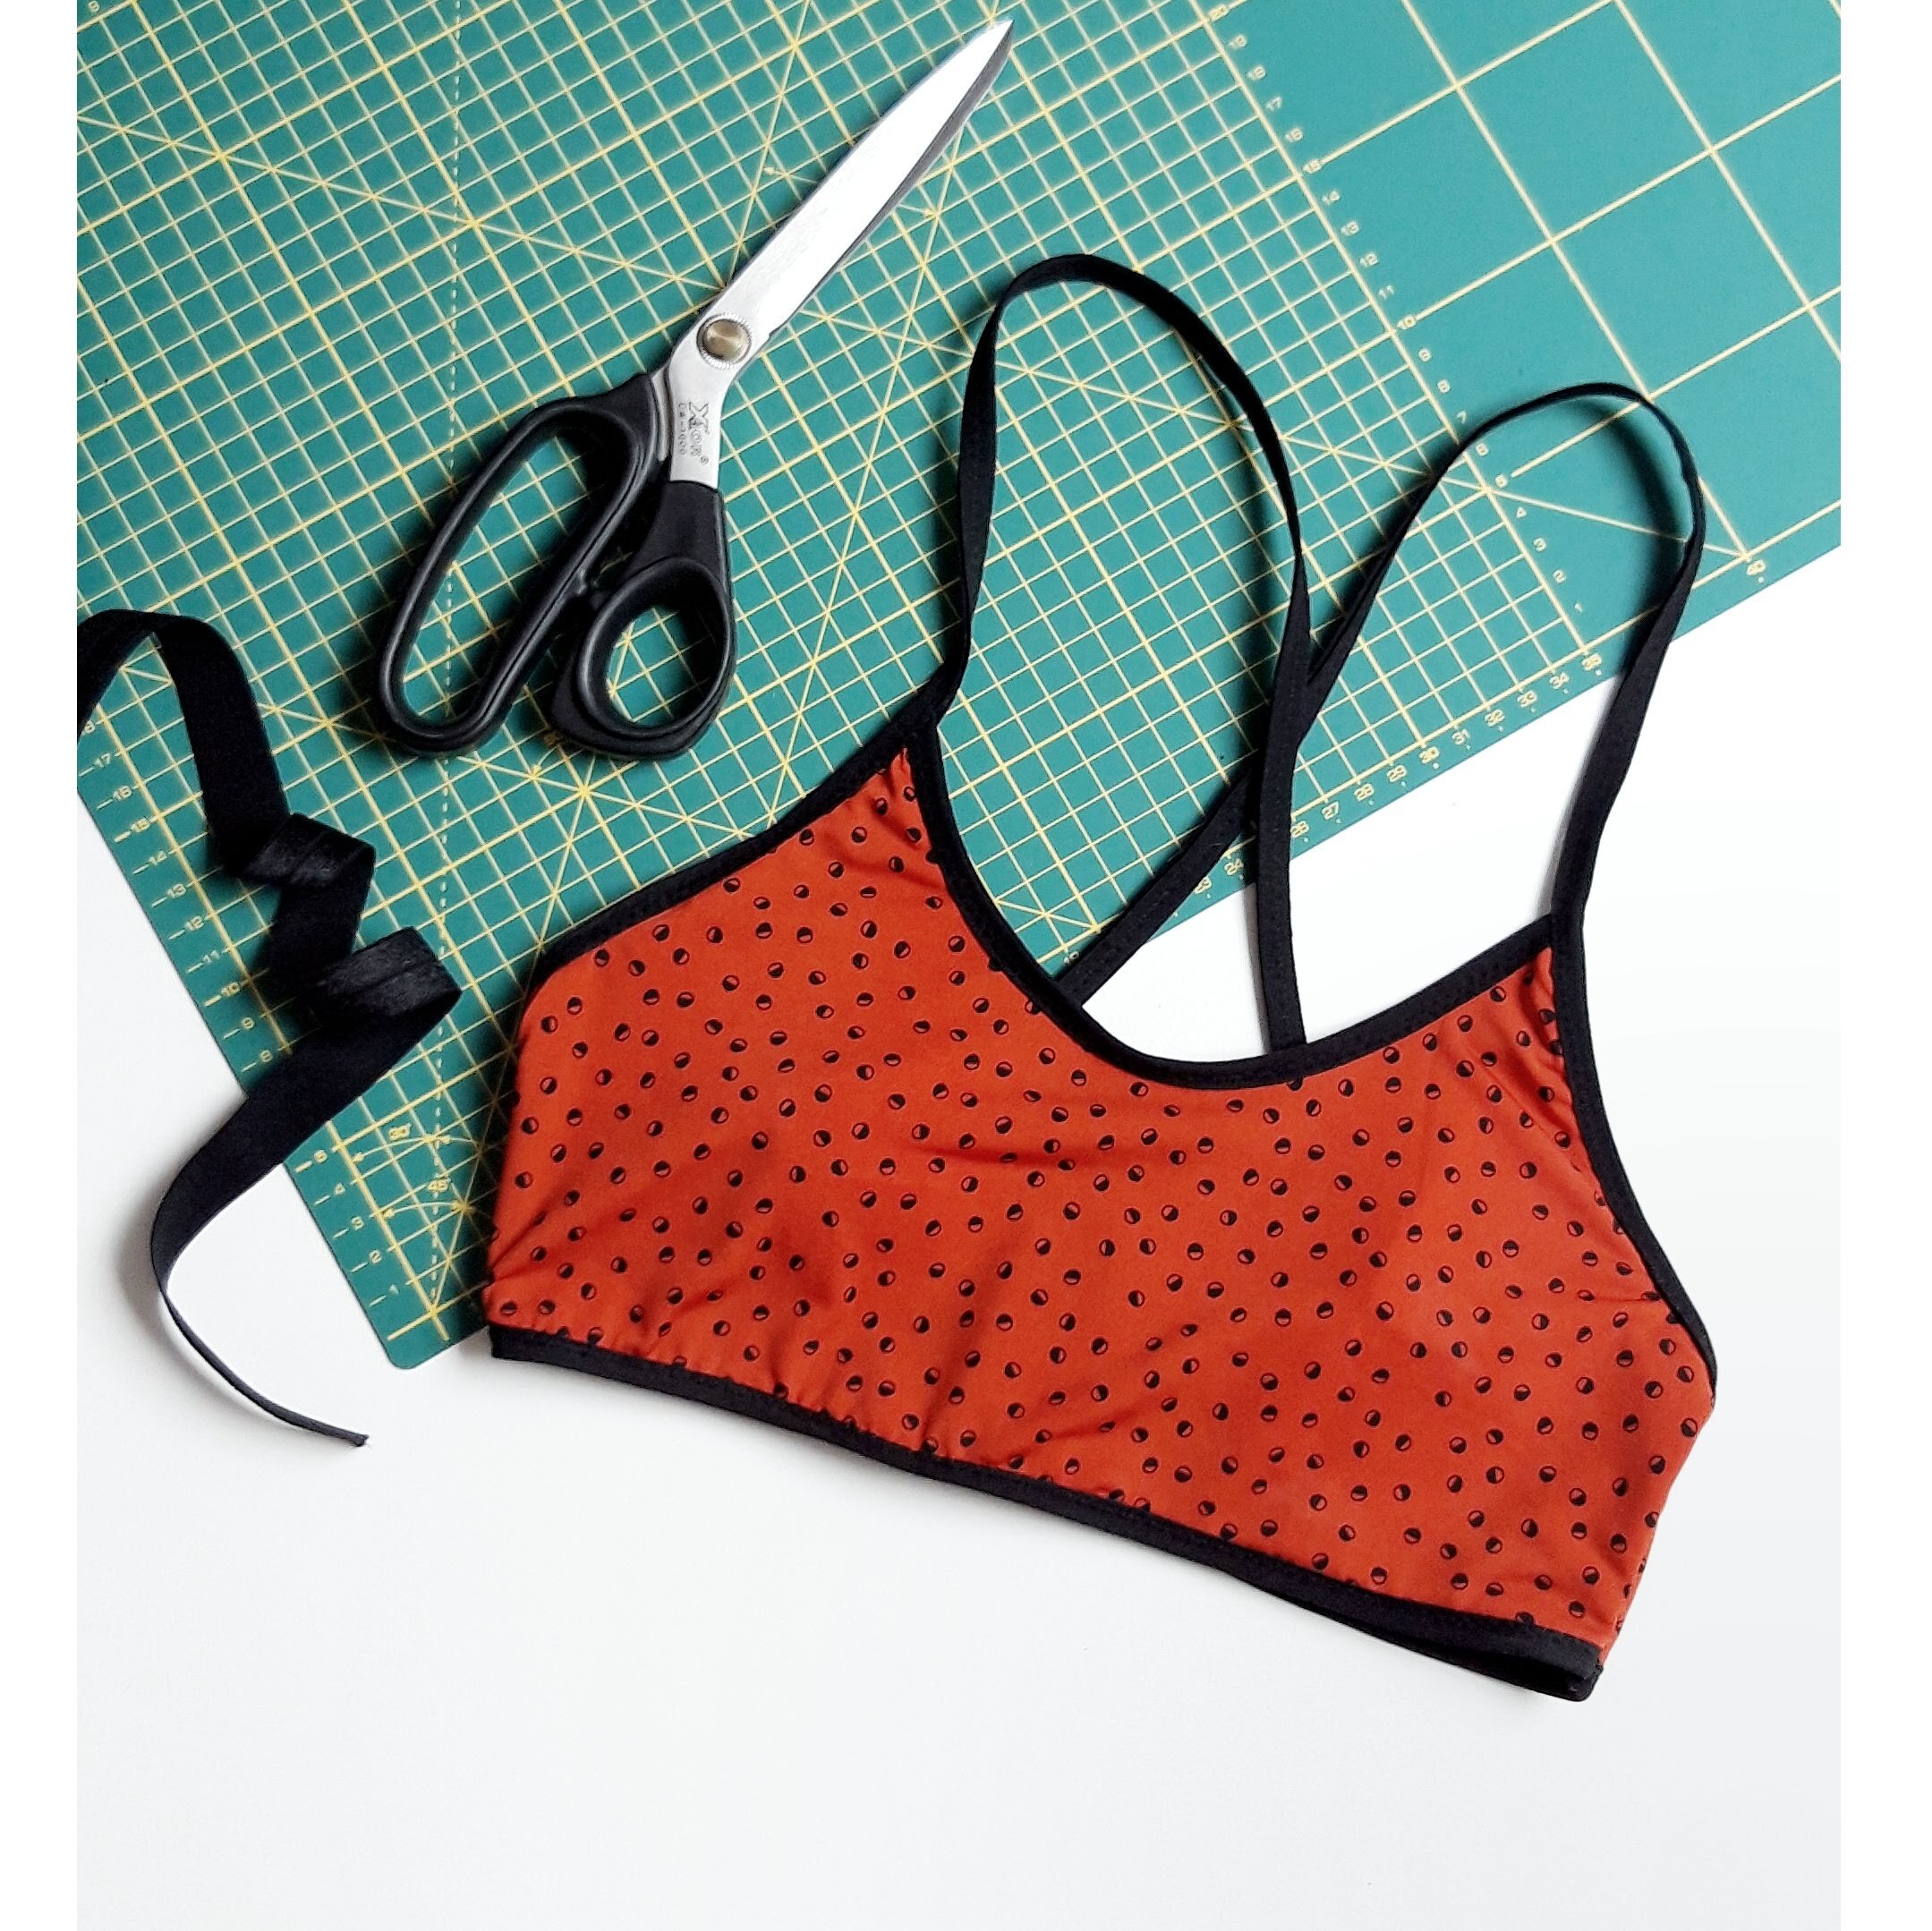 Comfort Bra Pattern With Back Closure Easy to Sew Workout Bra Pattern Bra Sewing Pattern Lingerie Patterns Sewing Pattern for Sports Bra